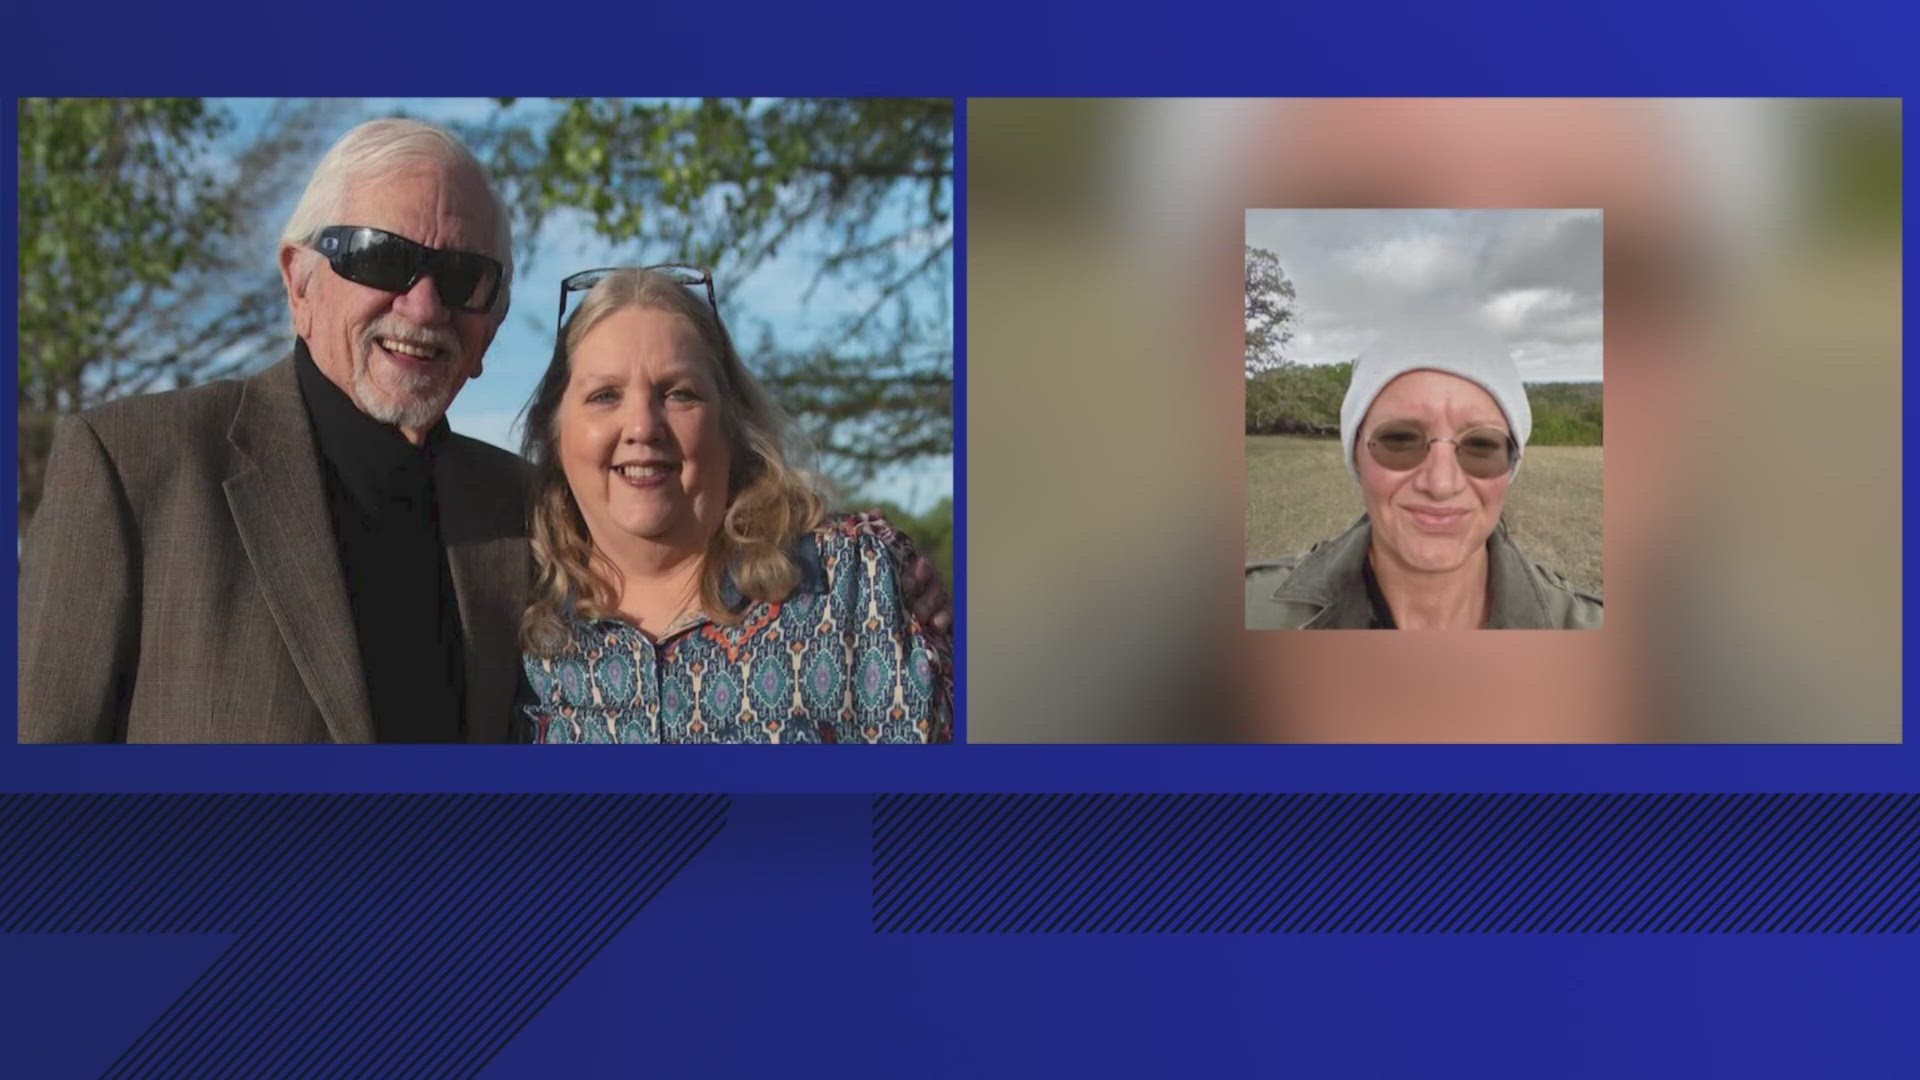 Documents shared with KENS 5 reveal the 88-year-old was strangled to death. Police are still searching for the woman at the center of the investigation.